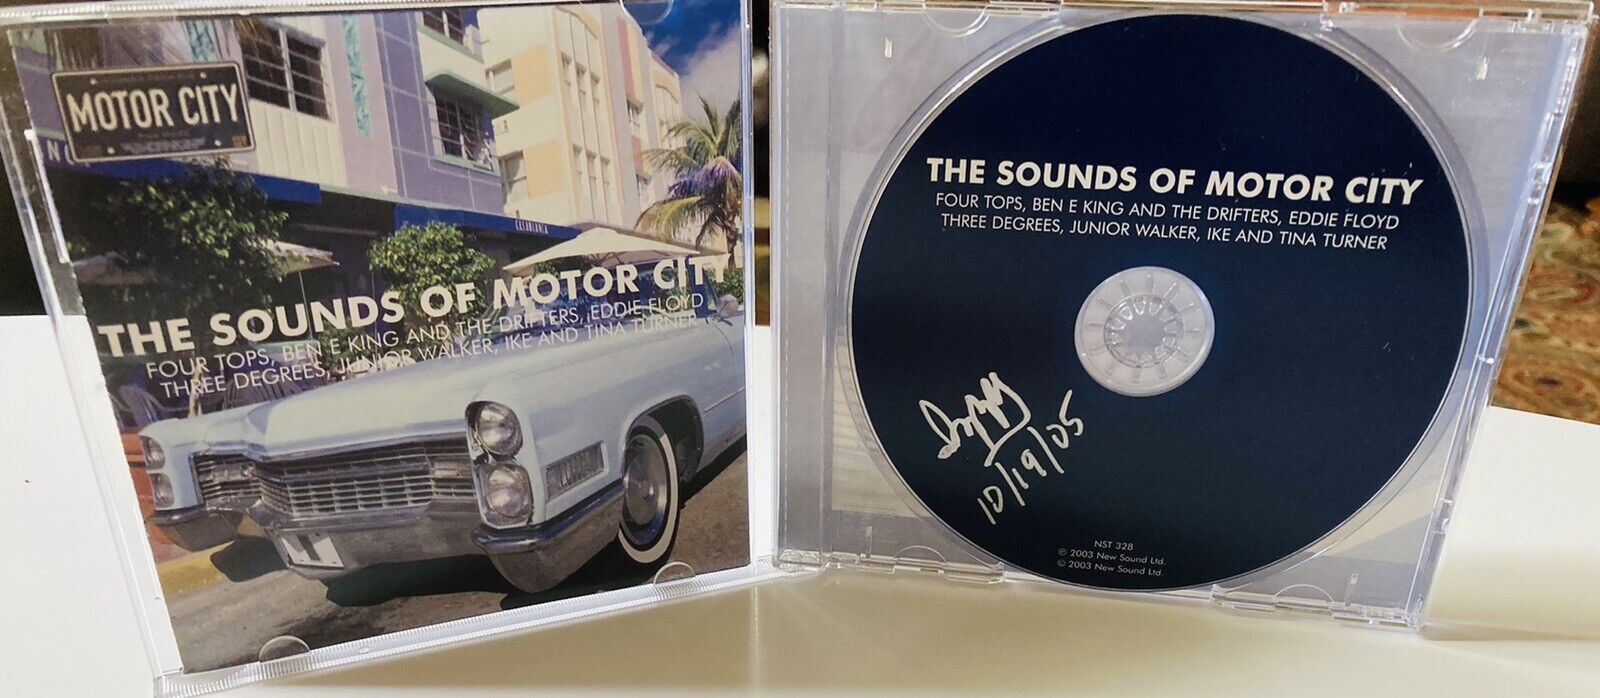 The Sounds Of Motor City (CD, 2004) Four Tops Temptations